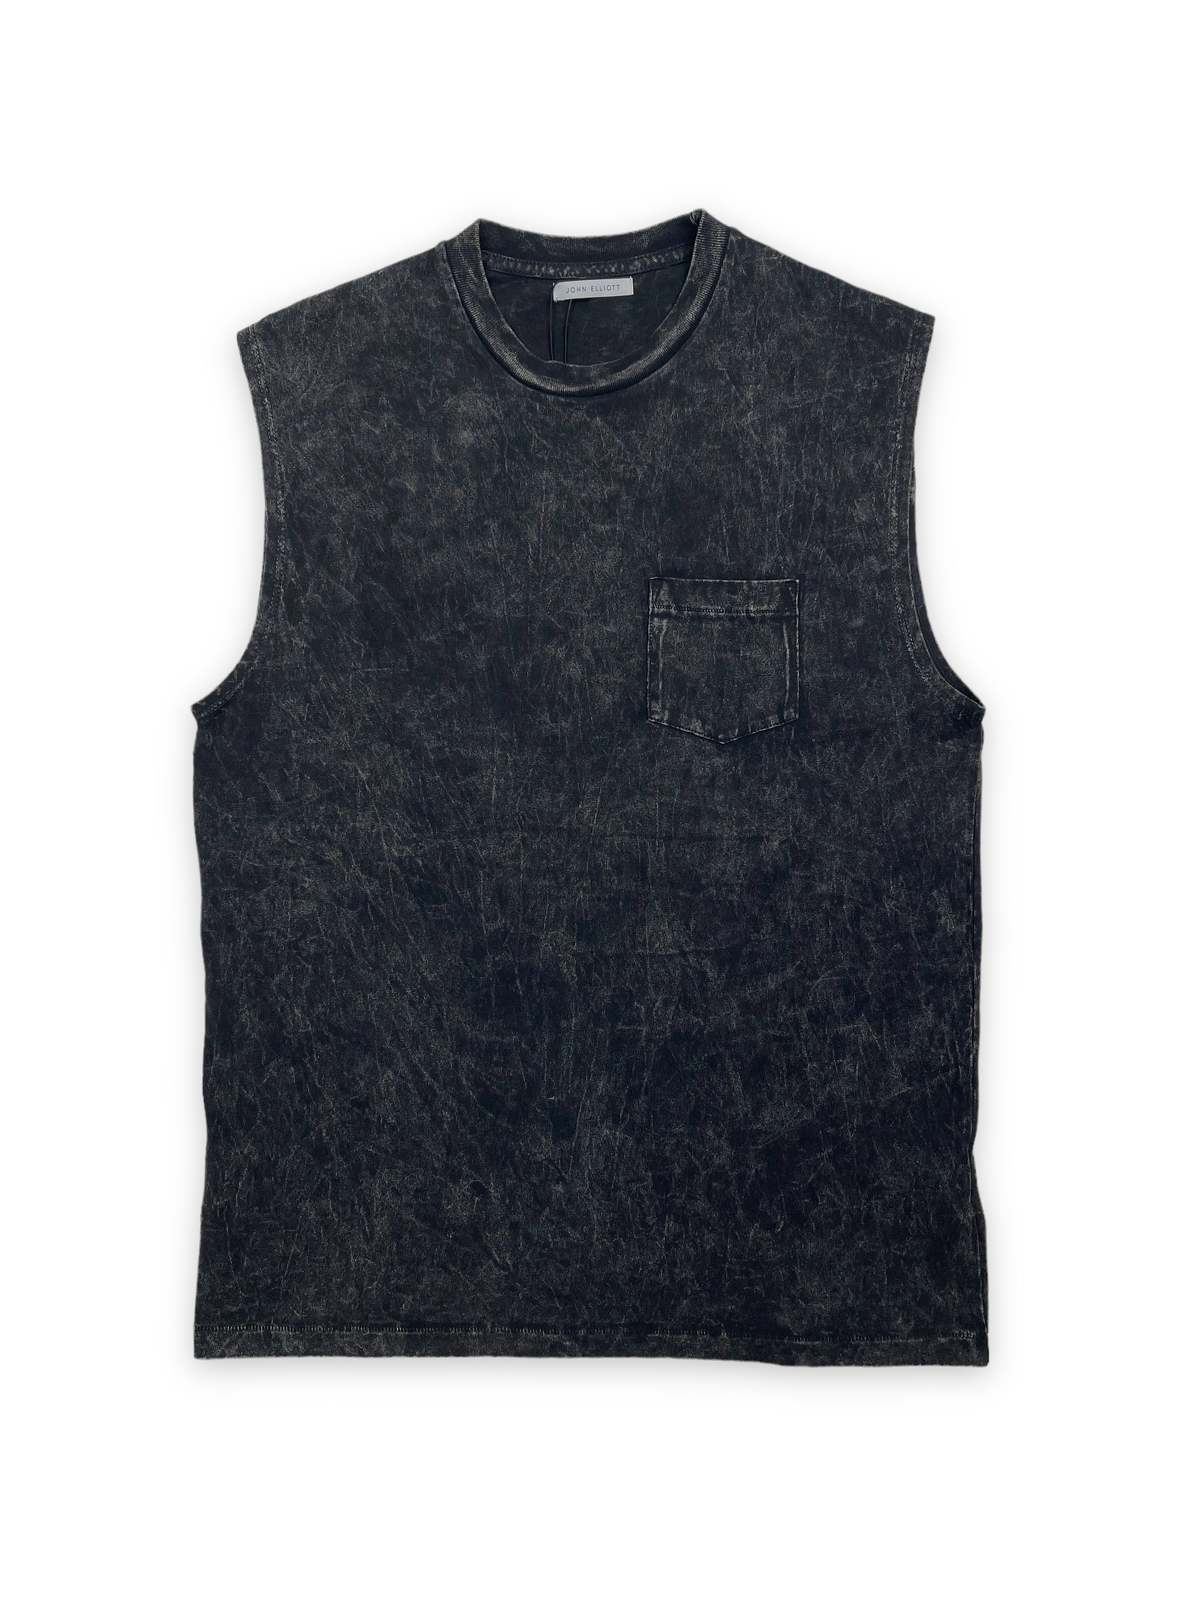 Mineral Wash Rodeo Tee